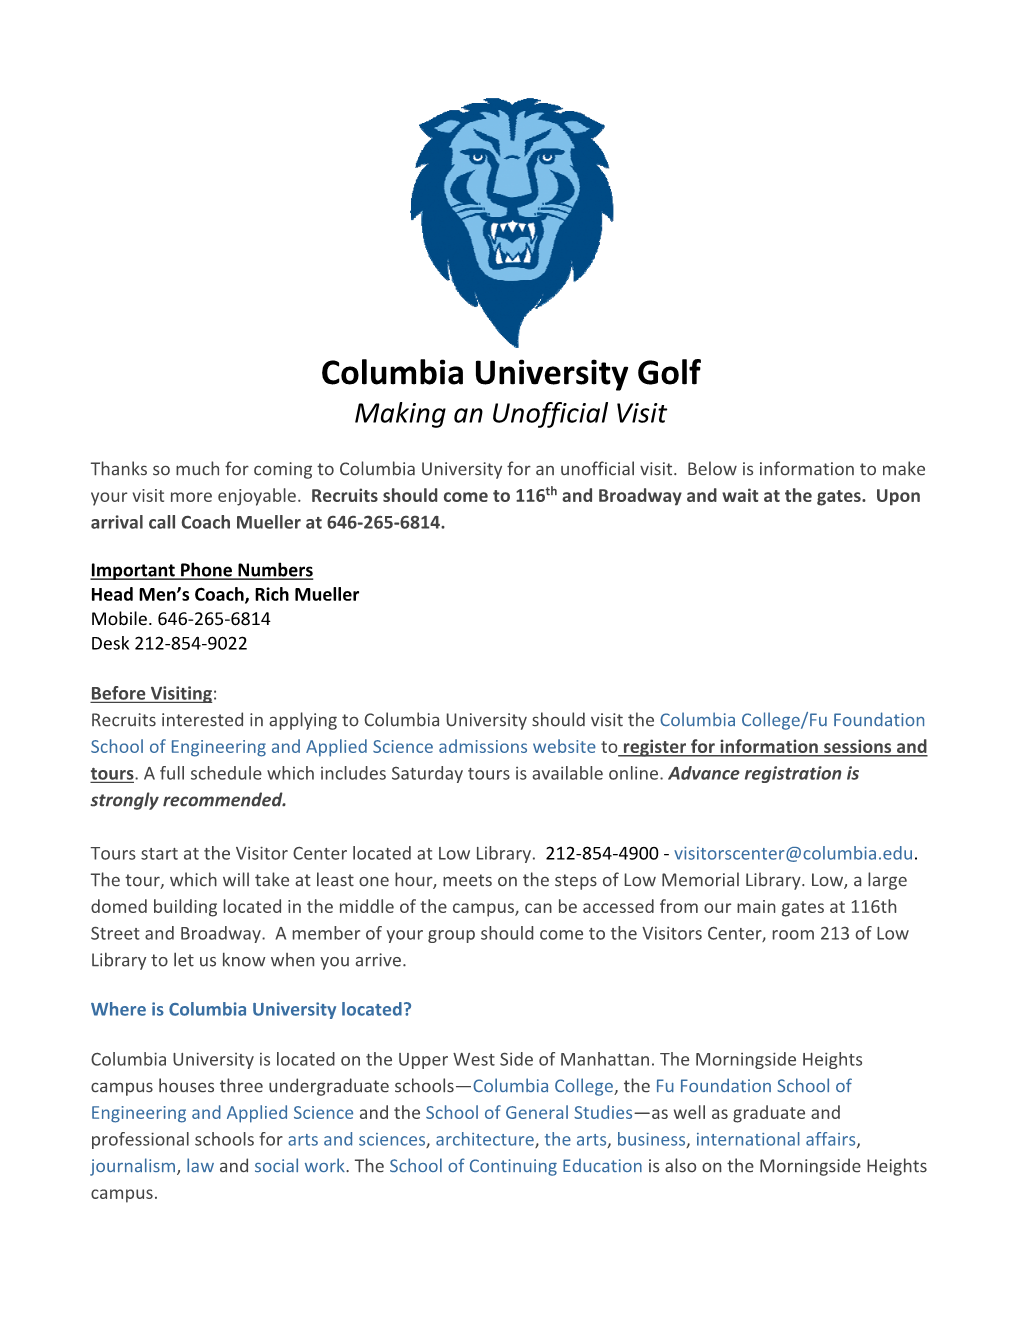 Columbia University Golf Making an Unofficial Visit